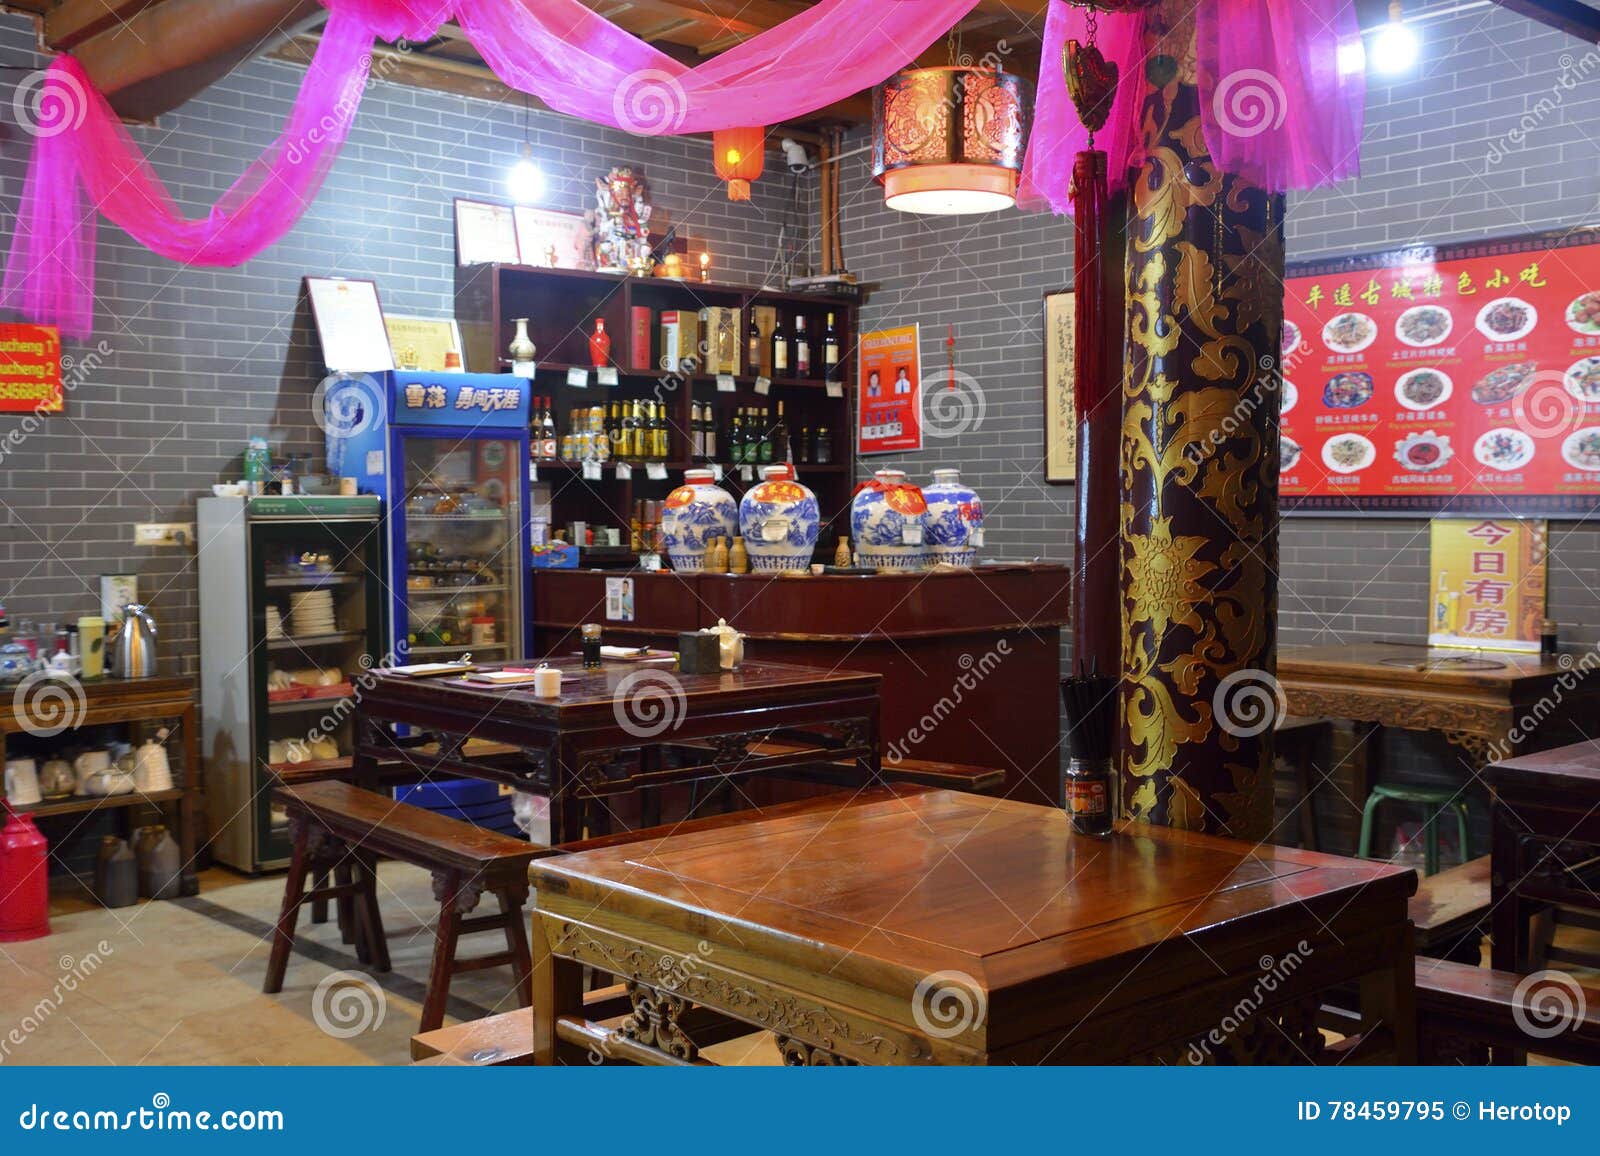 Chinese Style Small Restaurant with Red Ribbon Editorial Image - Image ...